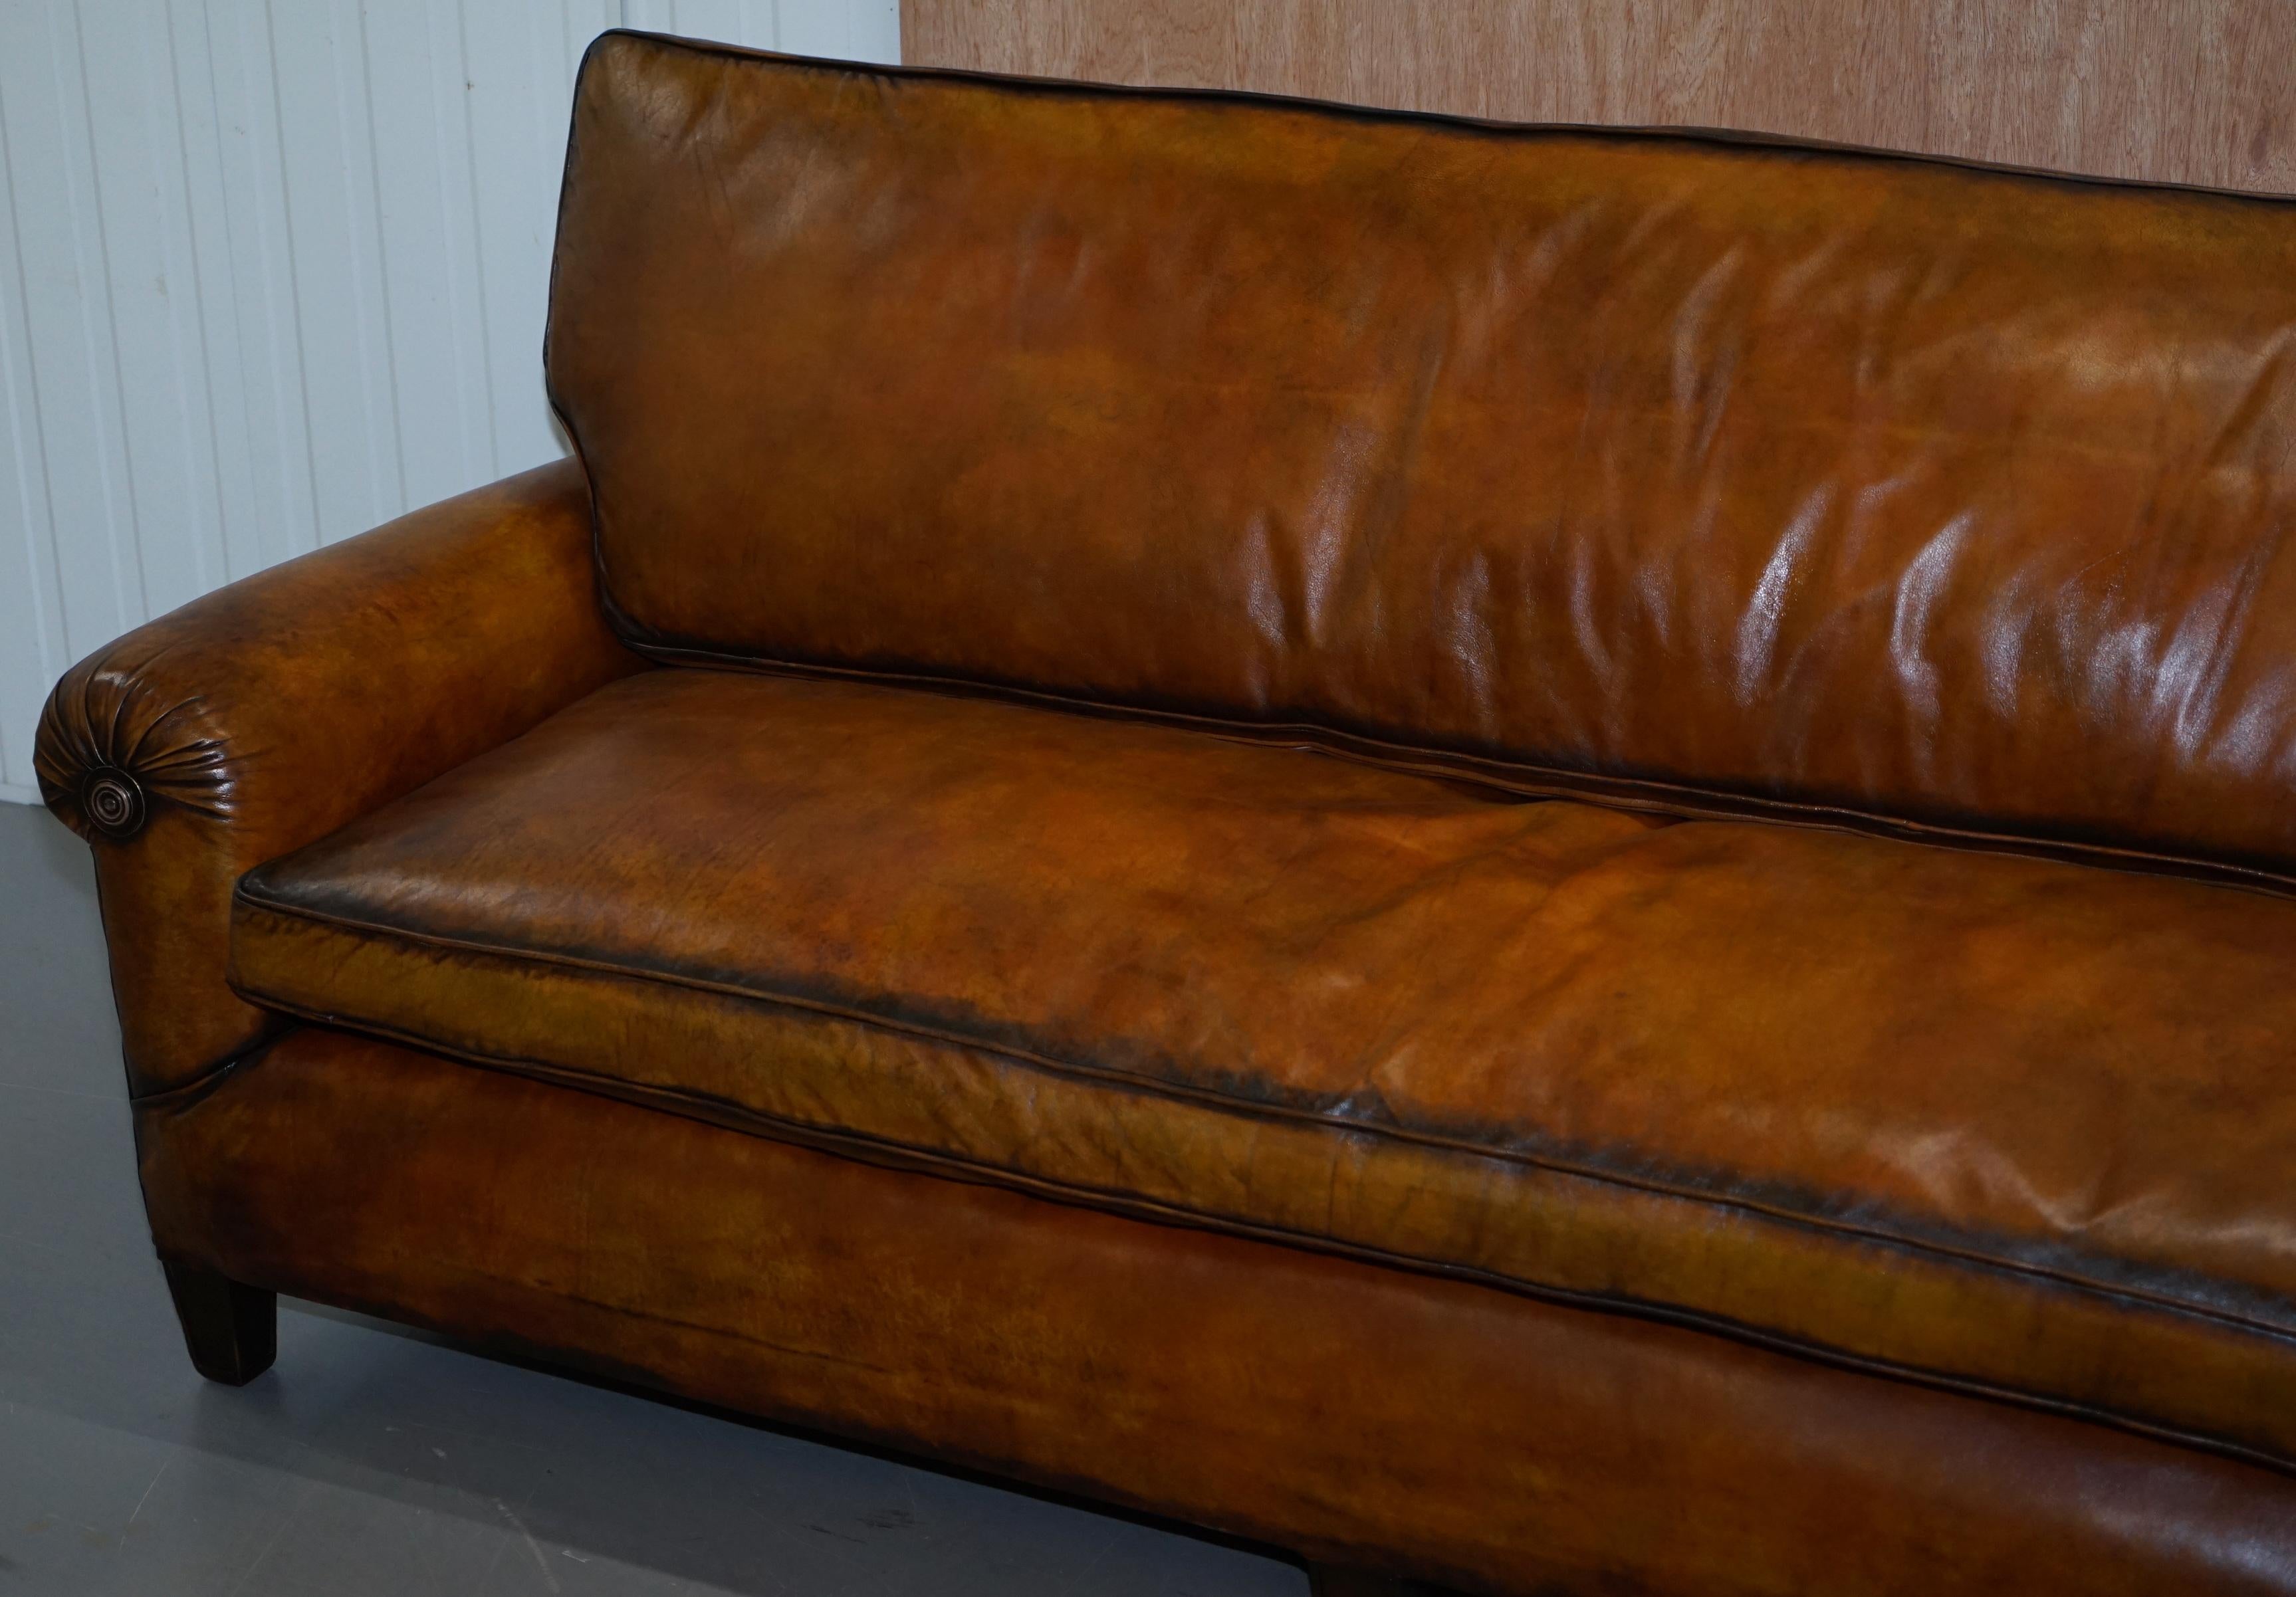 Hand-Crafted Very Rare Fully Restored Victorian Brown Leather Feather Filled Cushions Sofa